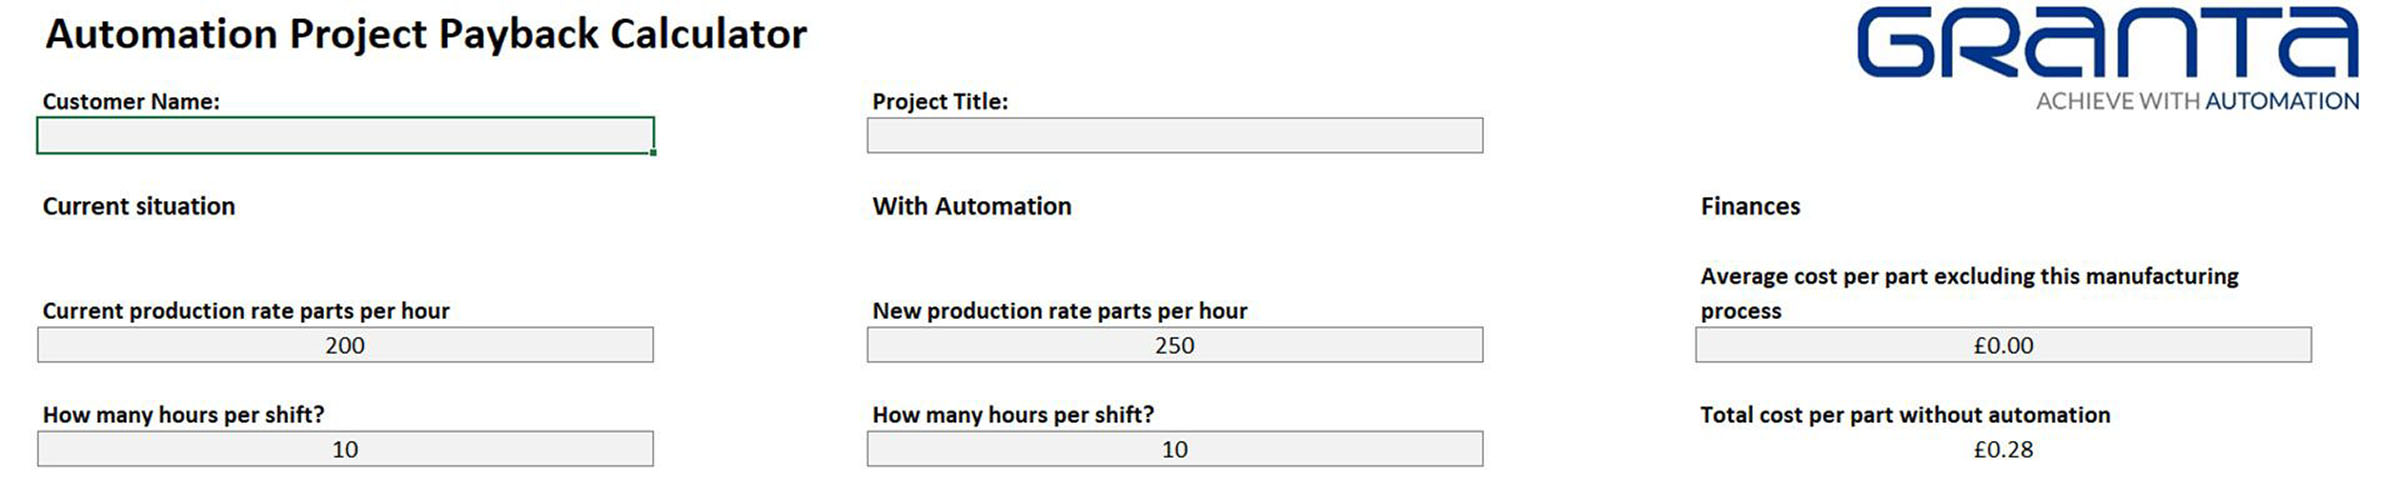 Automation project payback calculator banner